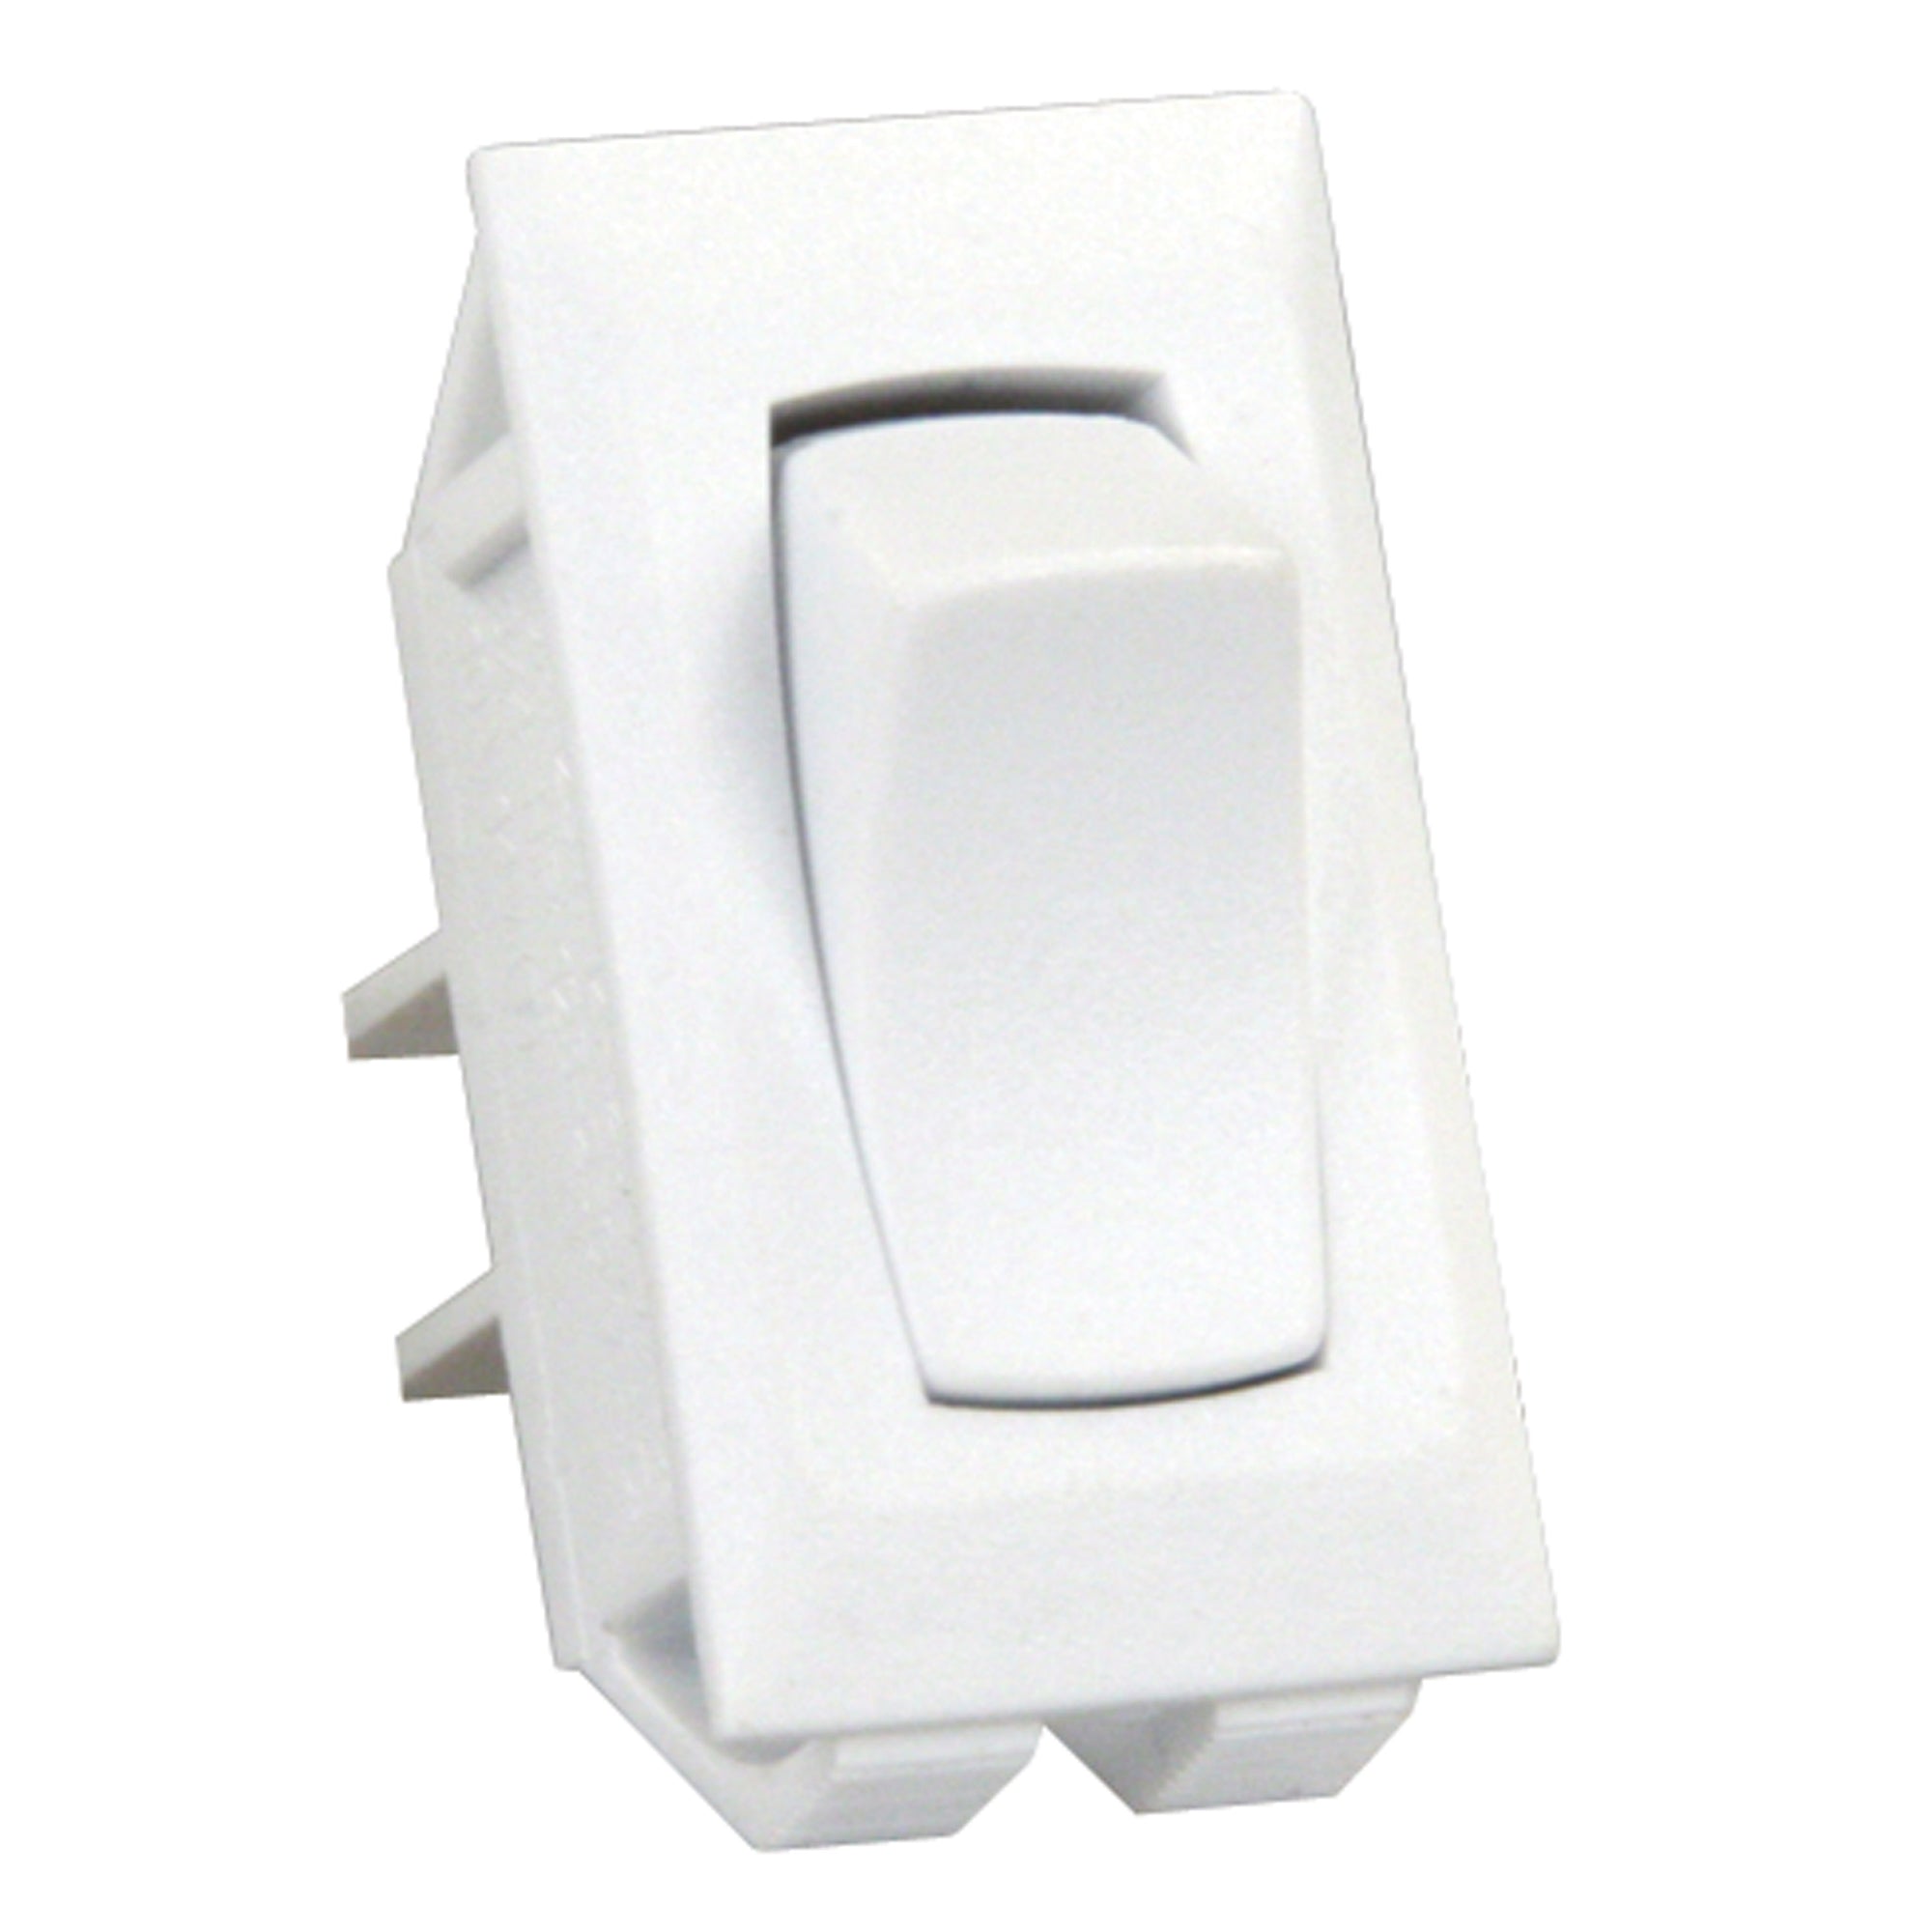 JR Products 13391-5 On/Off Switch, Pack of 5 - White